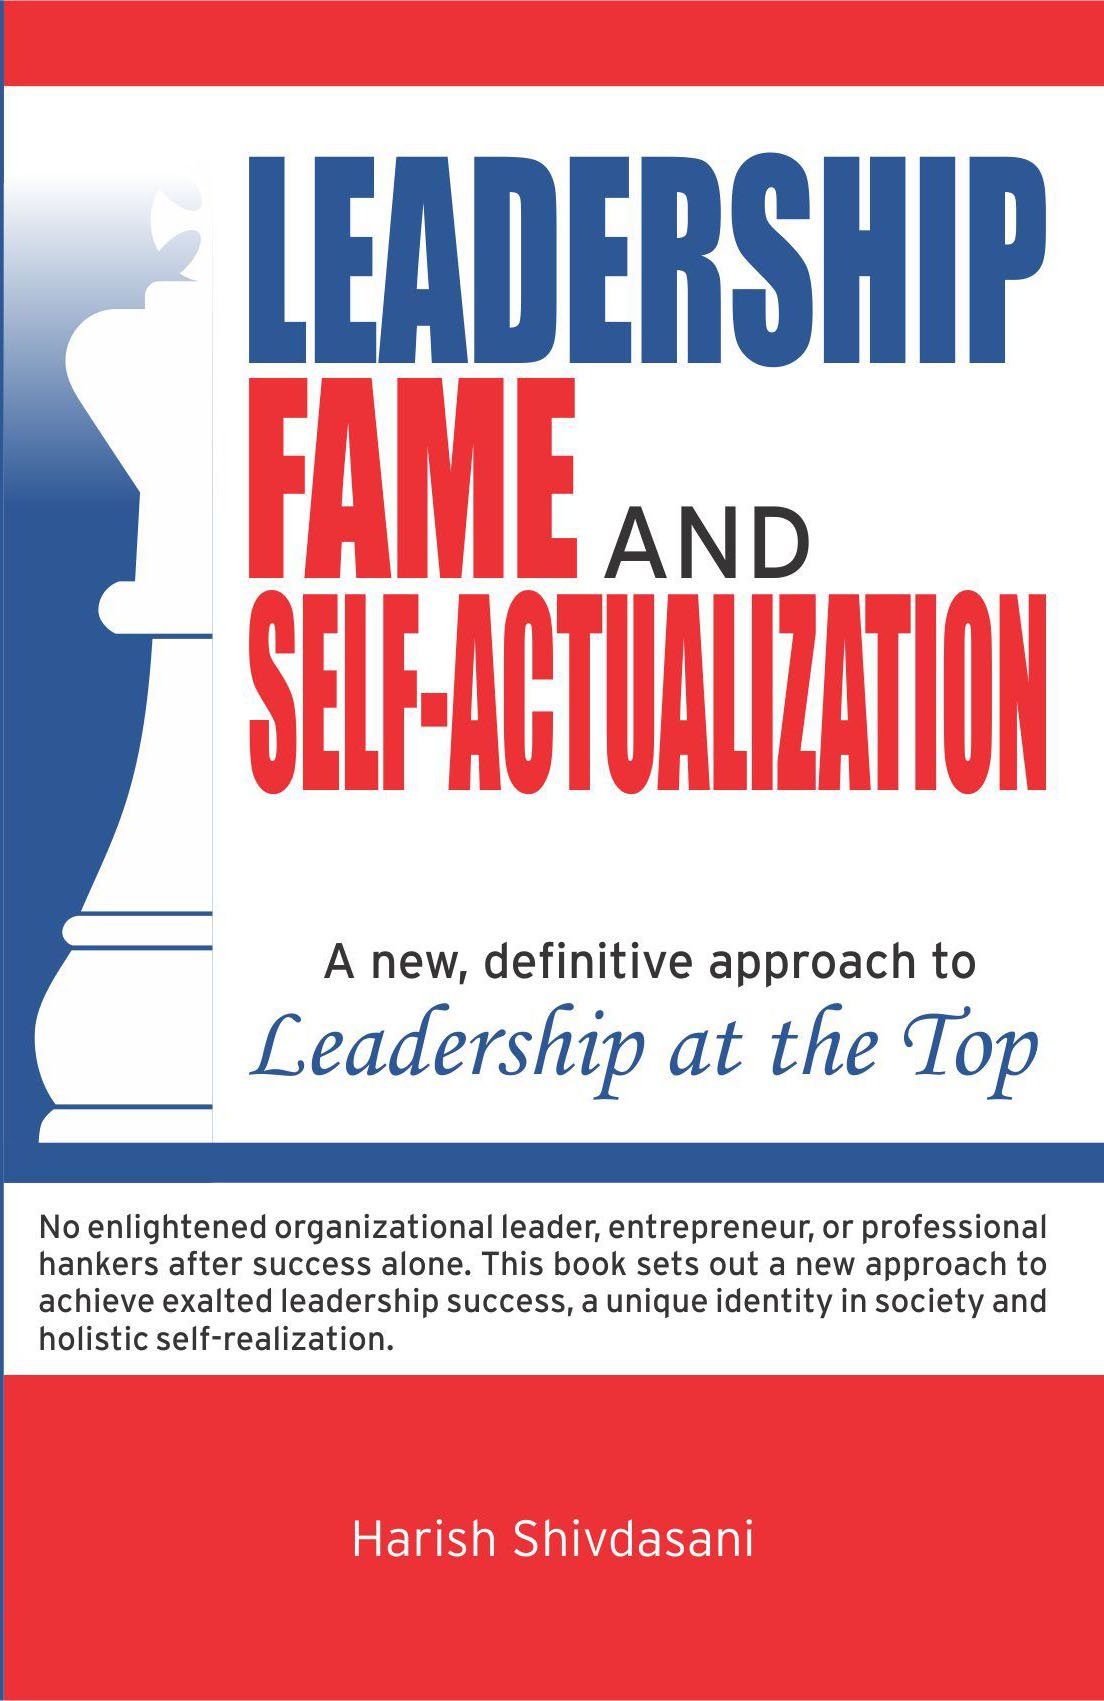 LEADERSHIP FRONT COVER